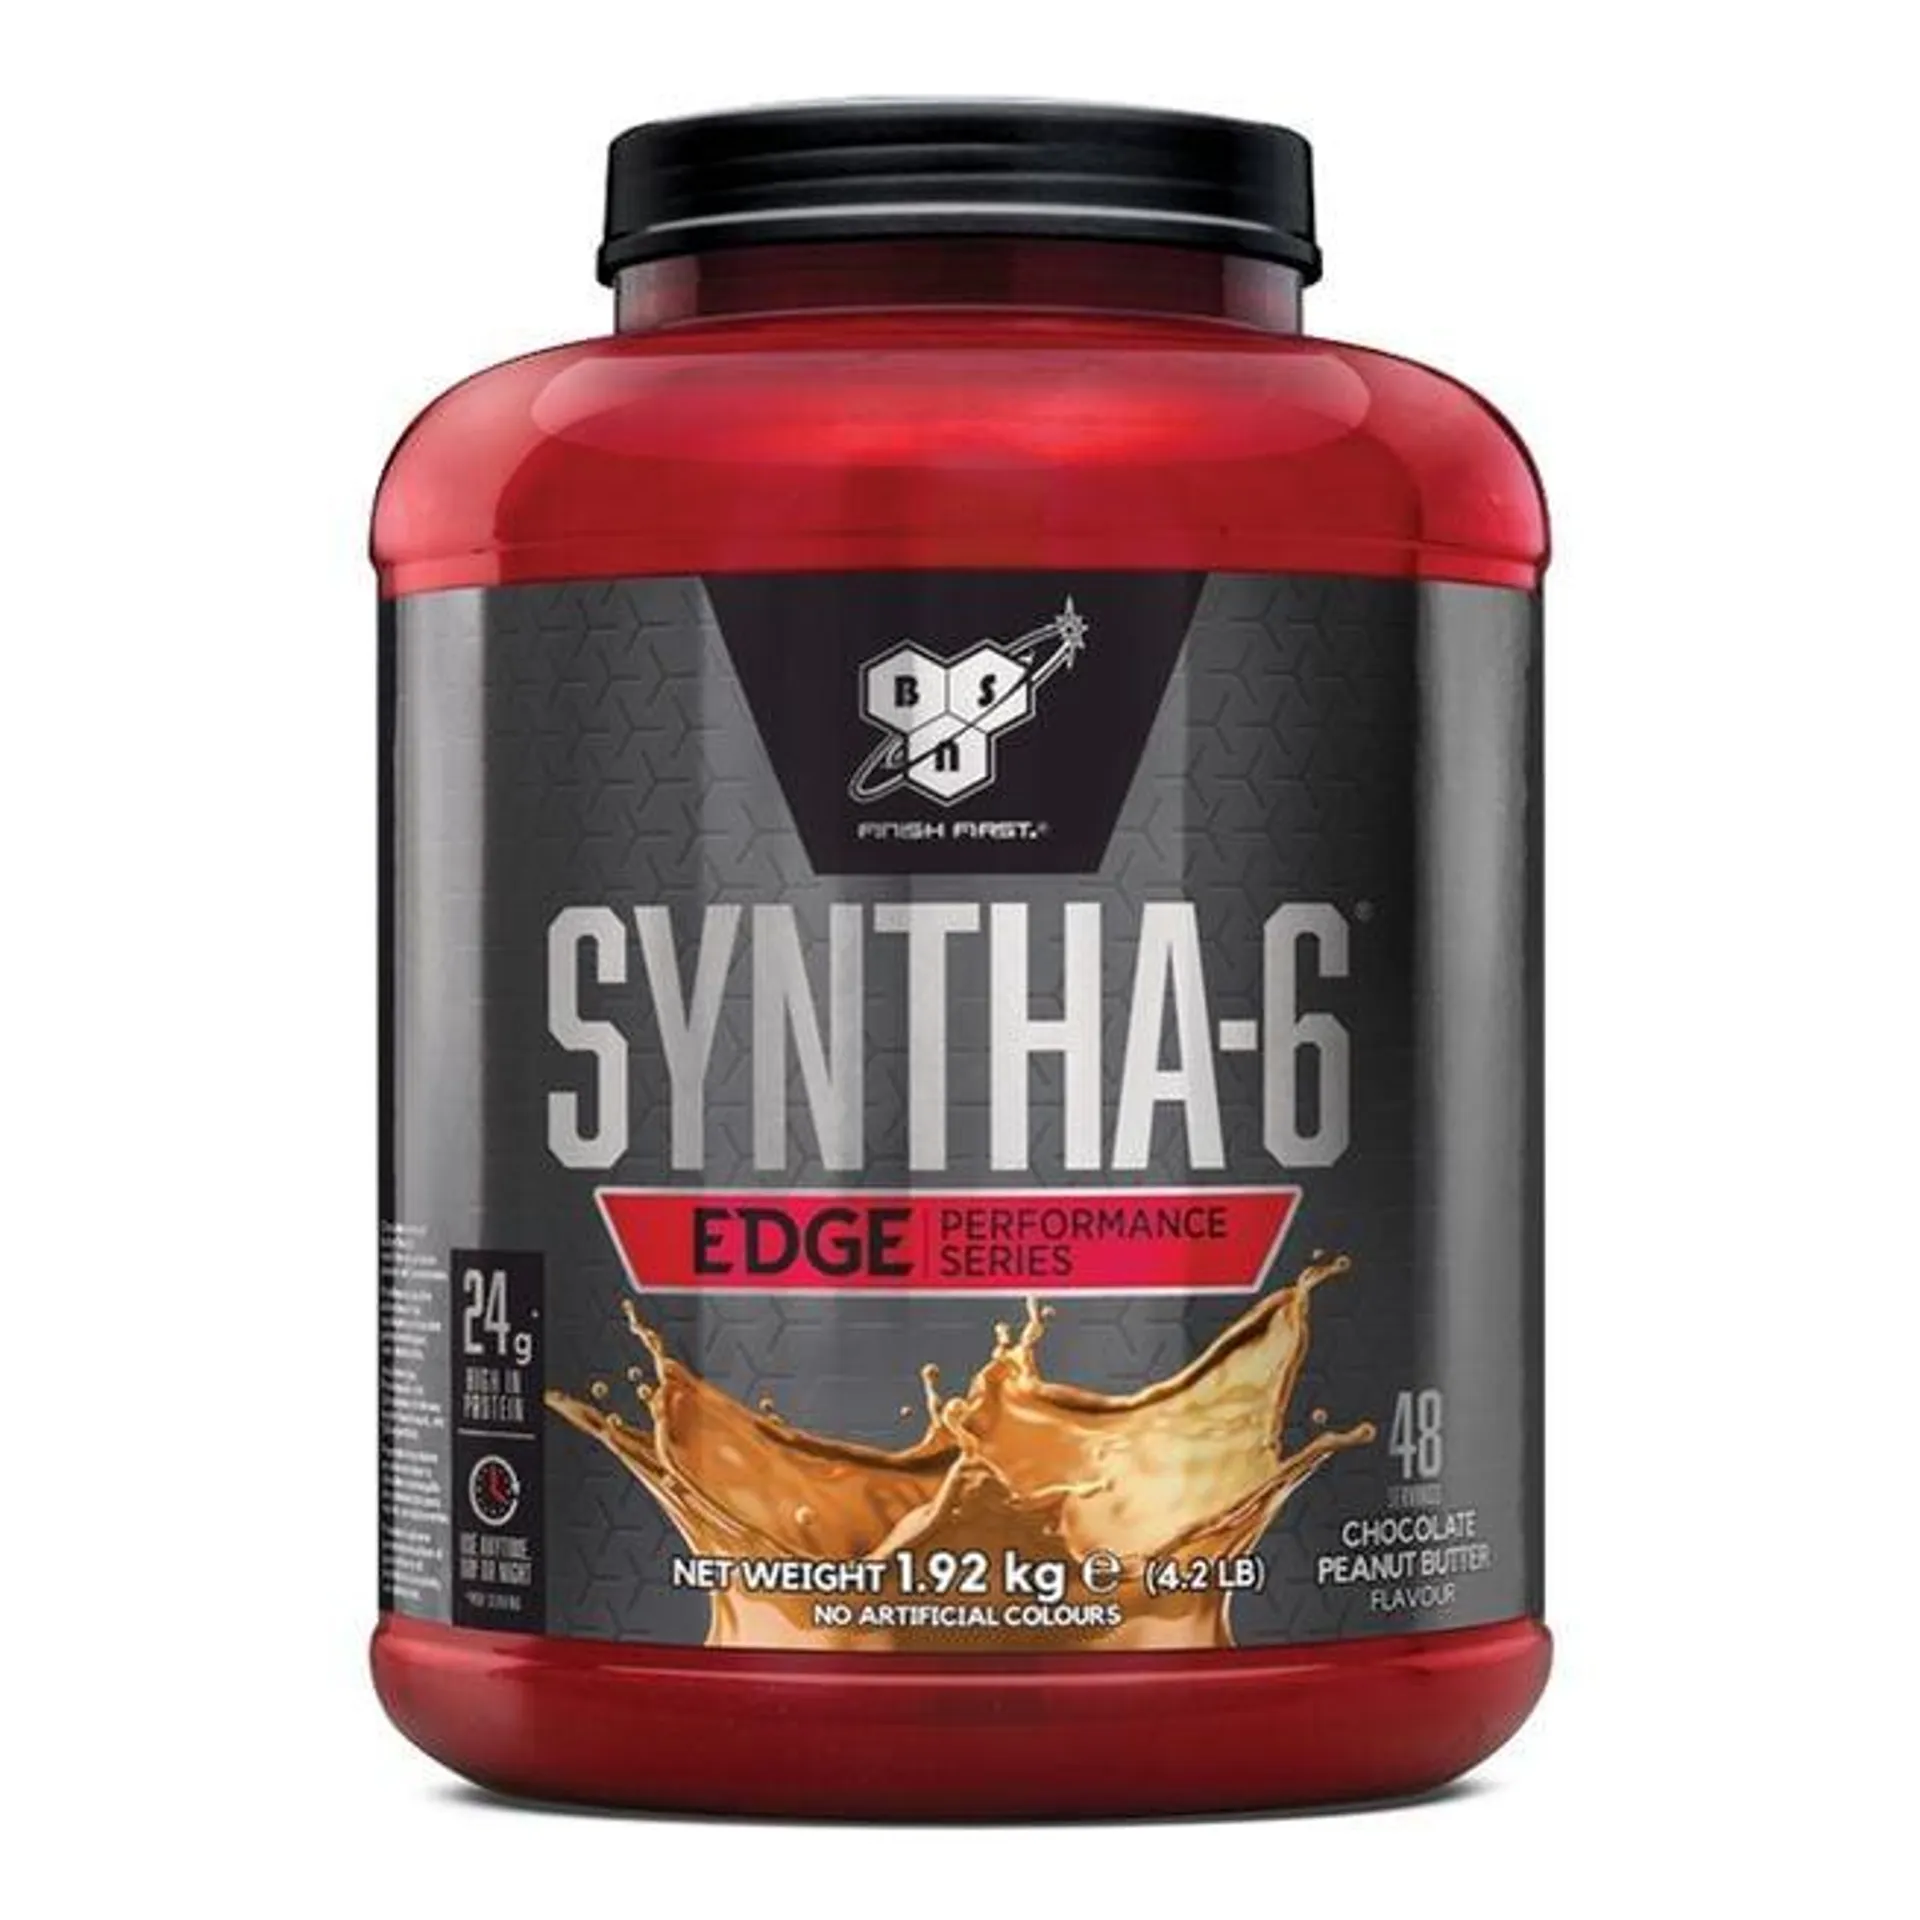 Syntha-6 Edge, 48 servings Chocolate Peanut Butter